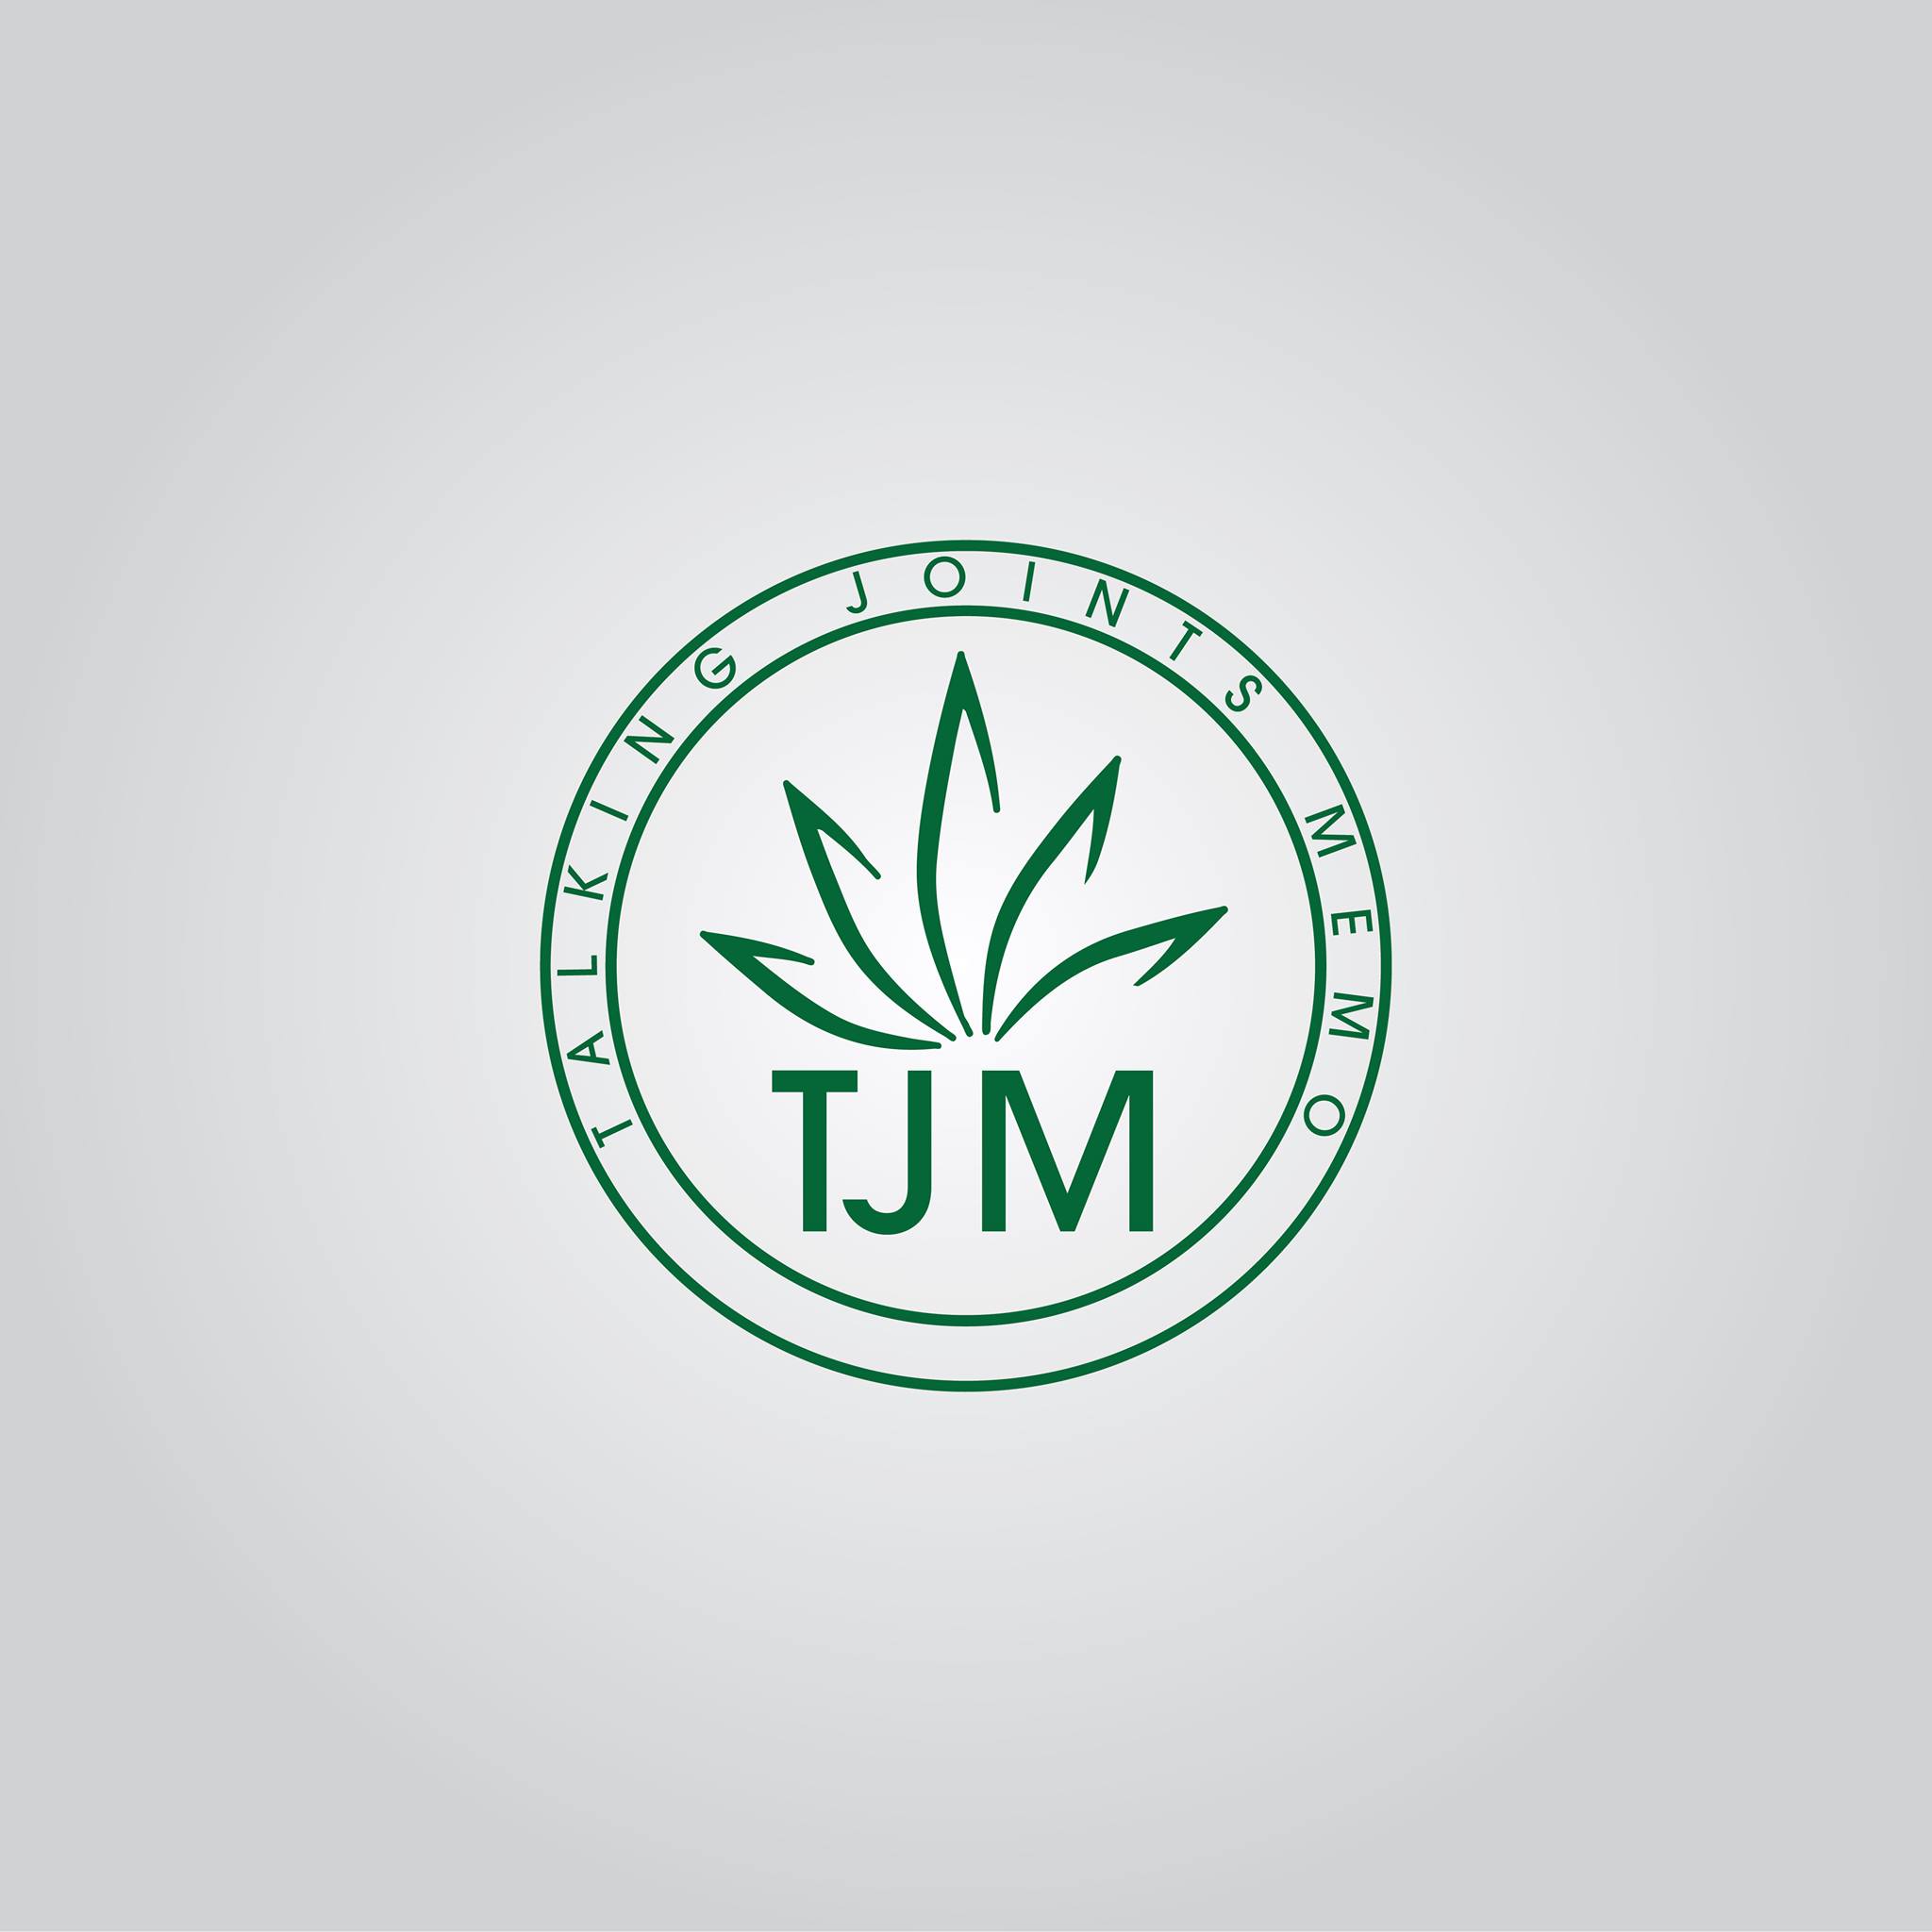 TODAY IN BRANDING: TALKING JOINTS MEMO REBRANDS FOR LOCAL CANNABIS INDUSTRY GAIN